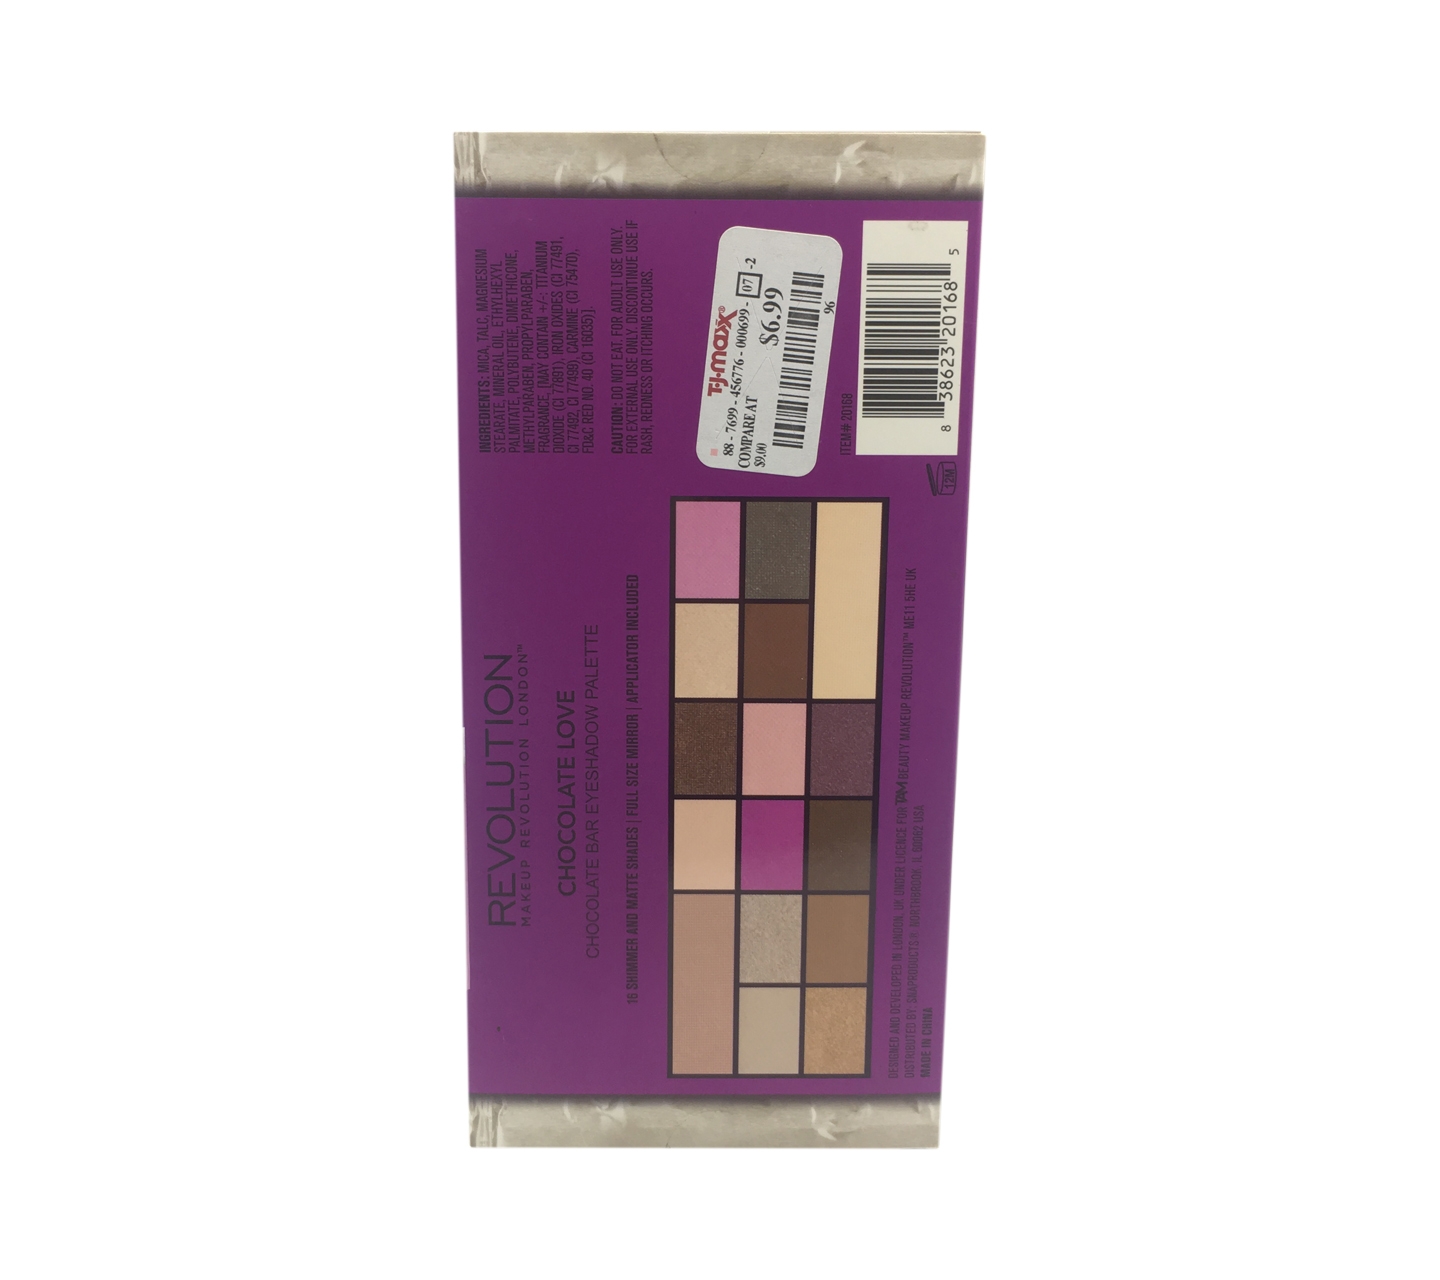 Revolution Contains 16 Shimmer And Matte Shades Chocolate Love Chocolate Bar eyeshadow Sets And Palette